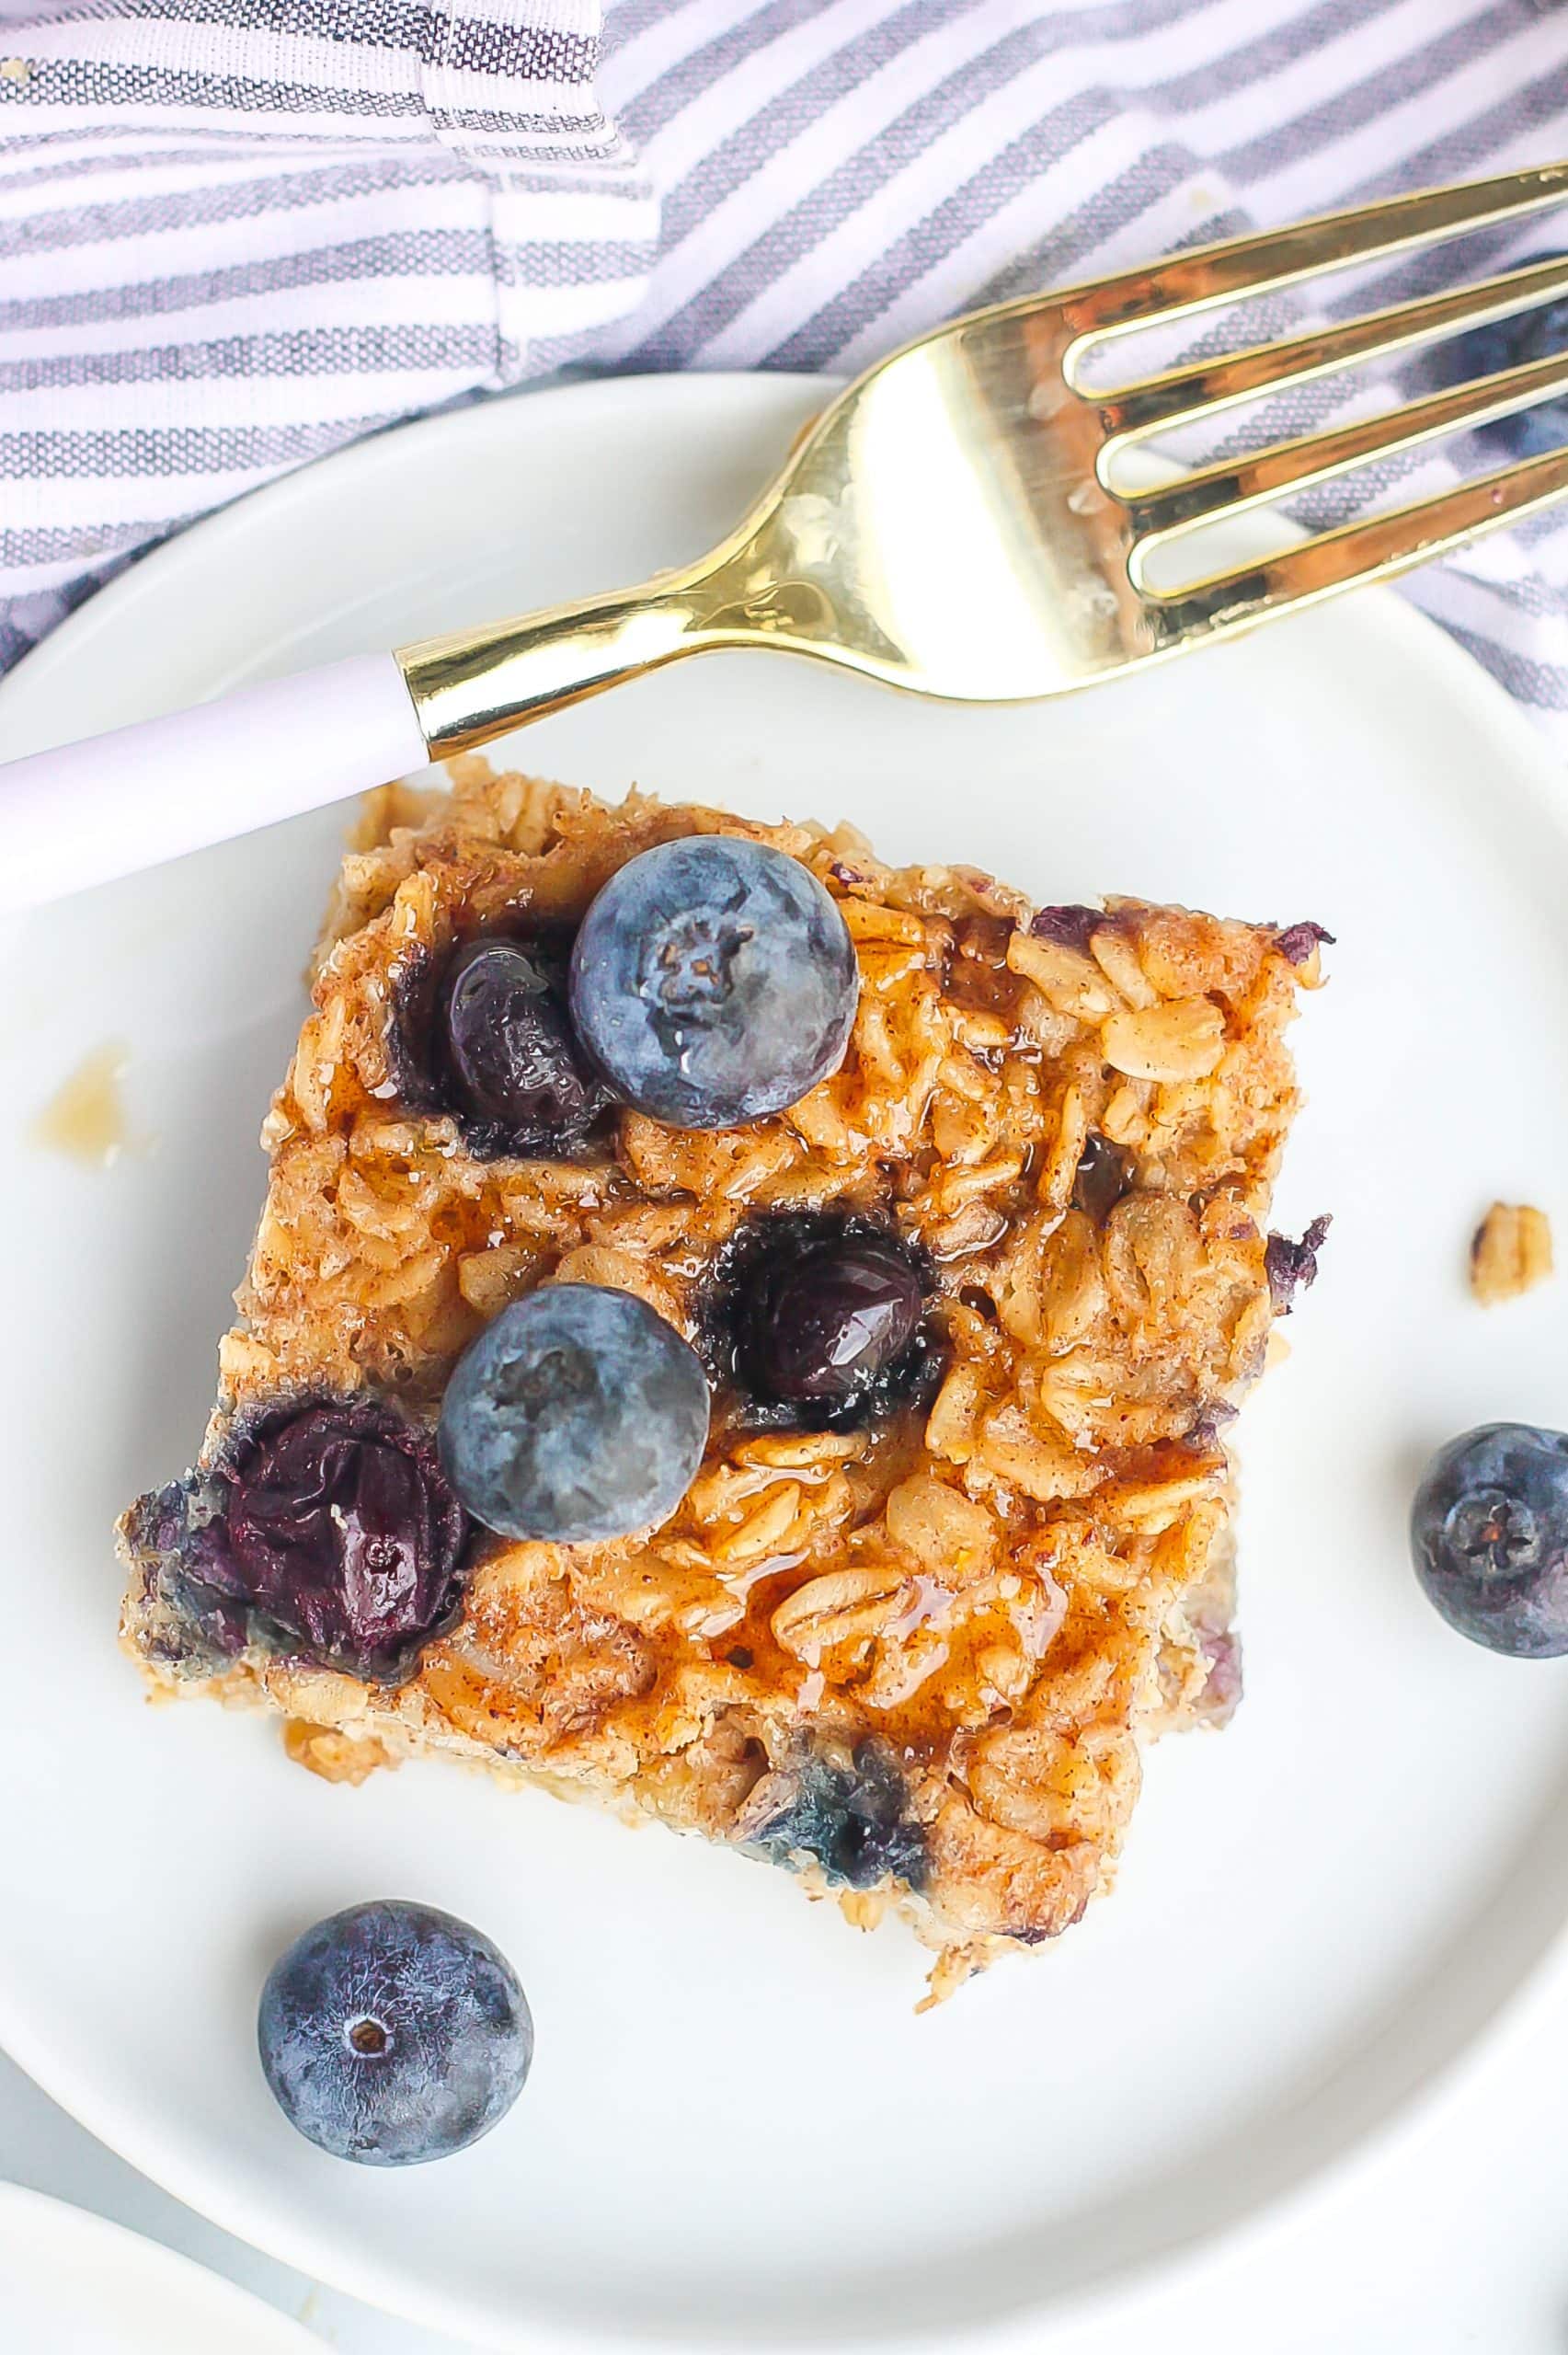 blueberry oatmeal square on white plate with fork